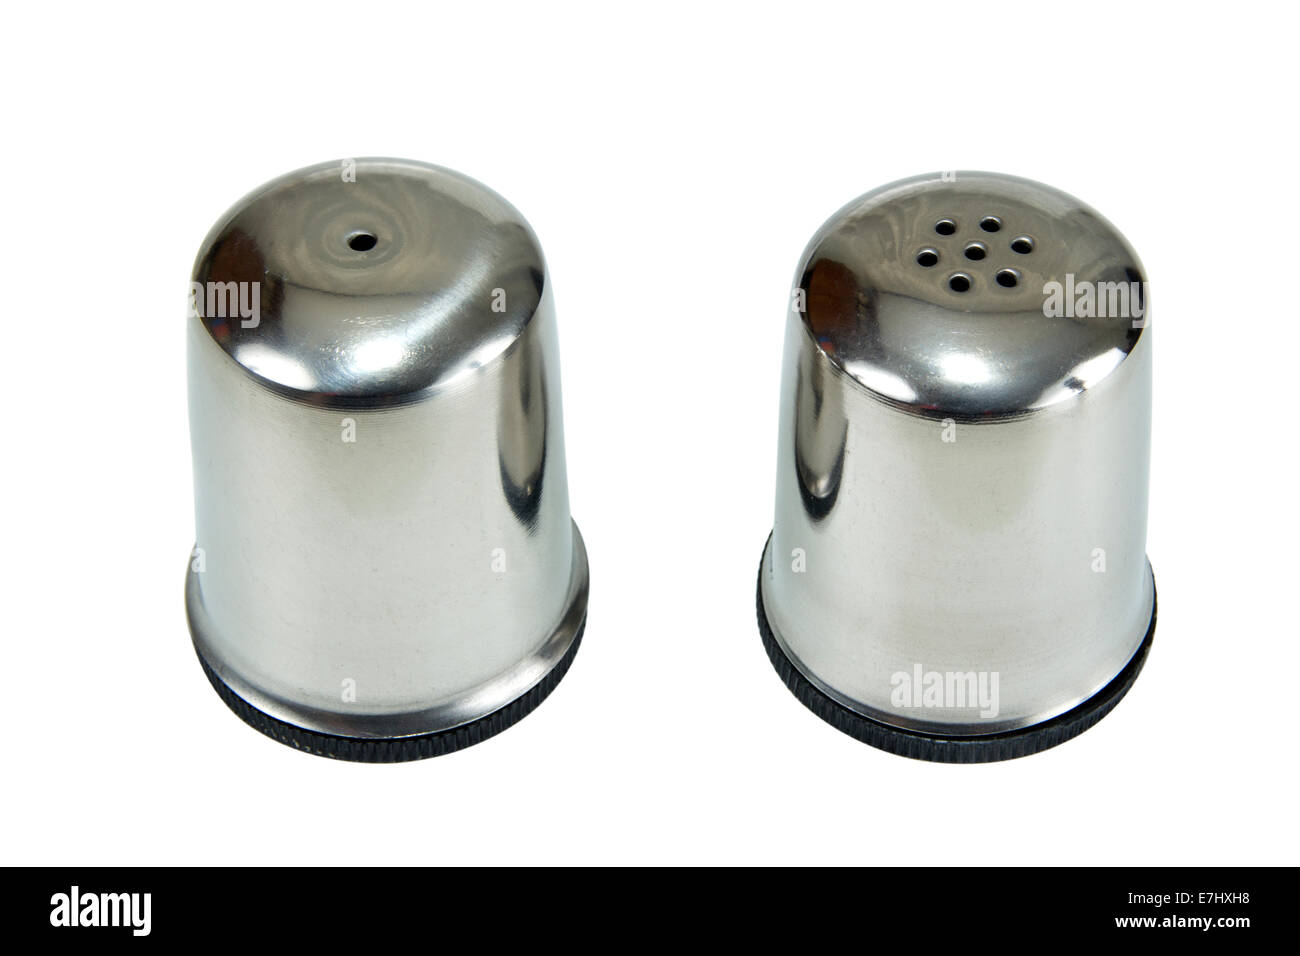 Metal saltcellar and pepper shaker isolated on white background with clipping path Stock Photo